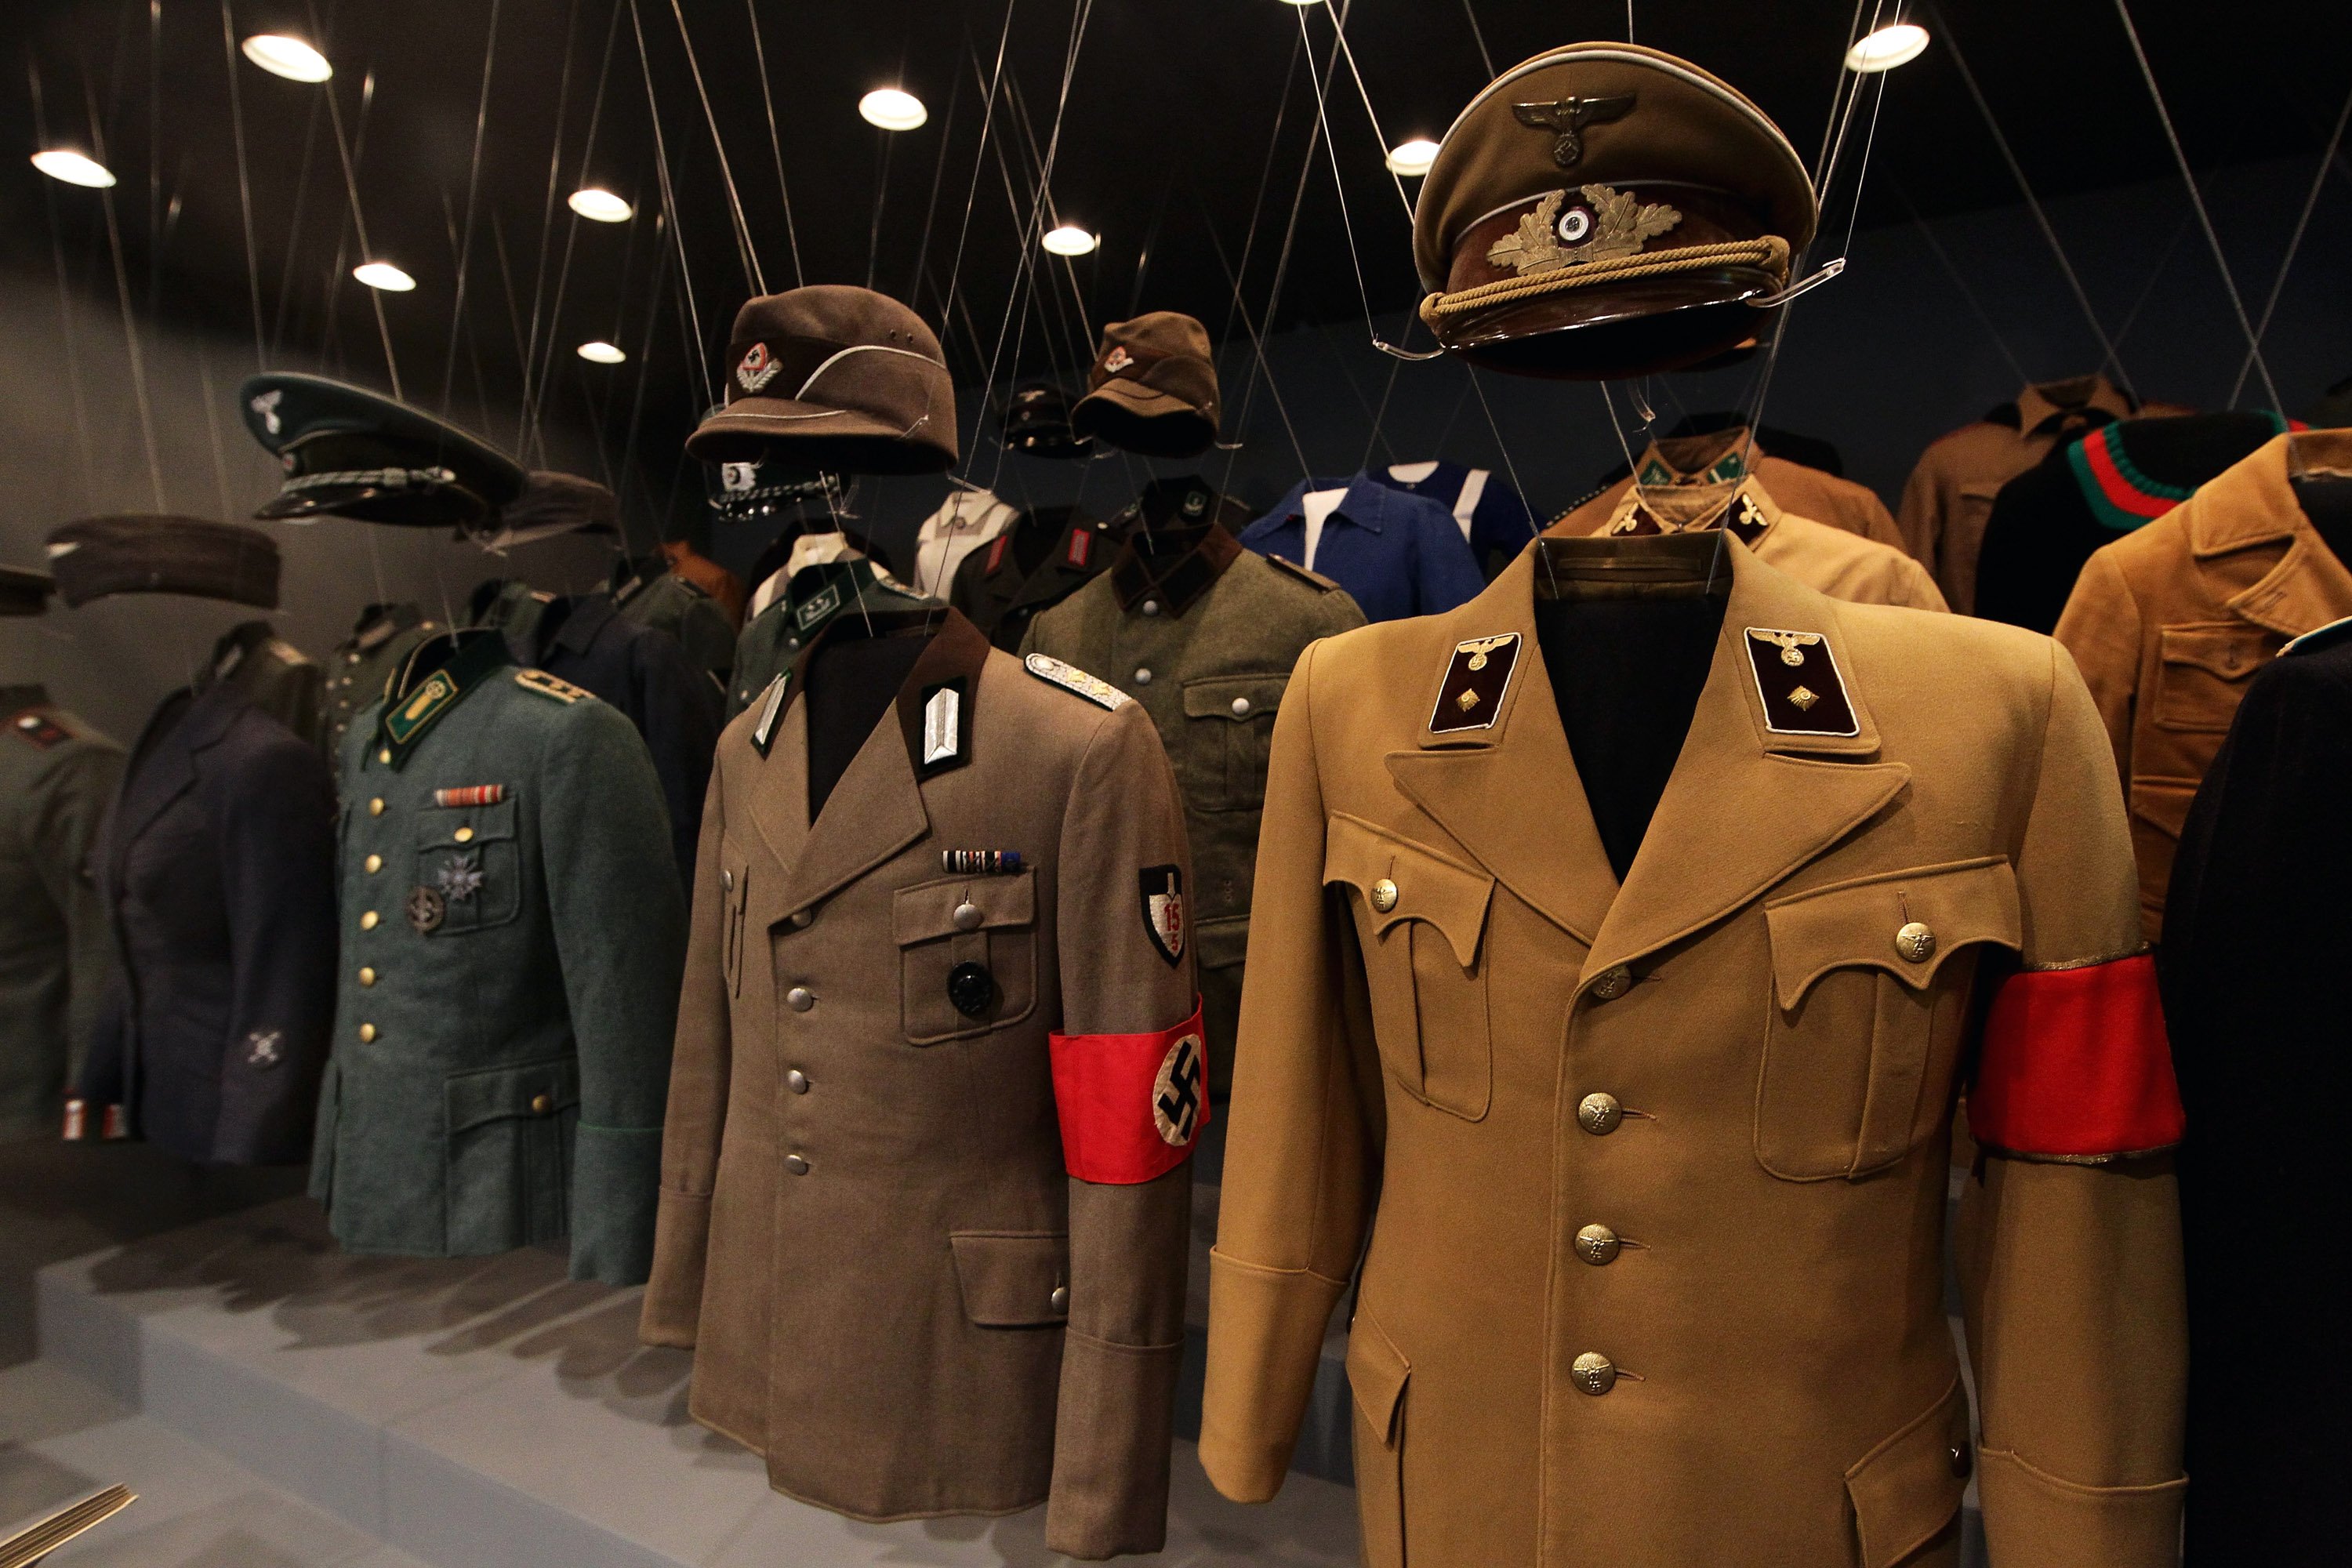 WW2 Uniform Grouping With War Trophies And Trench Art - town-green.com